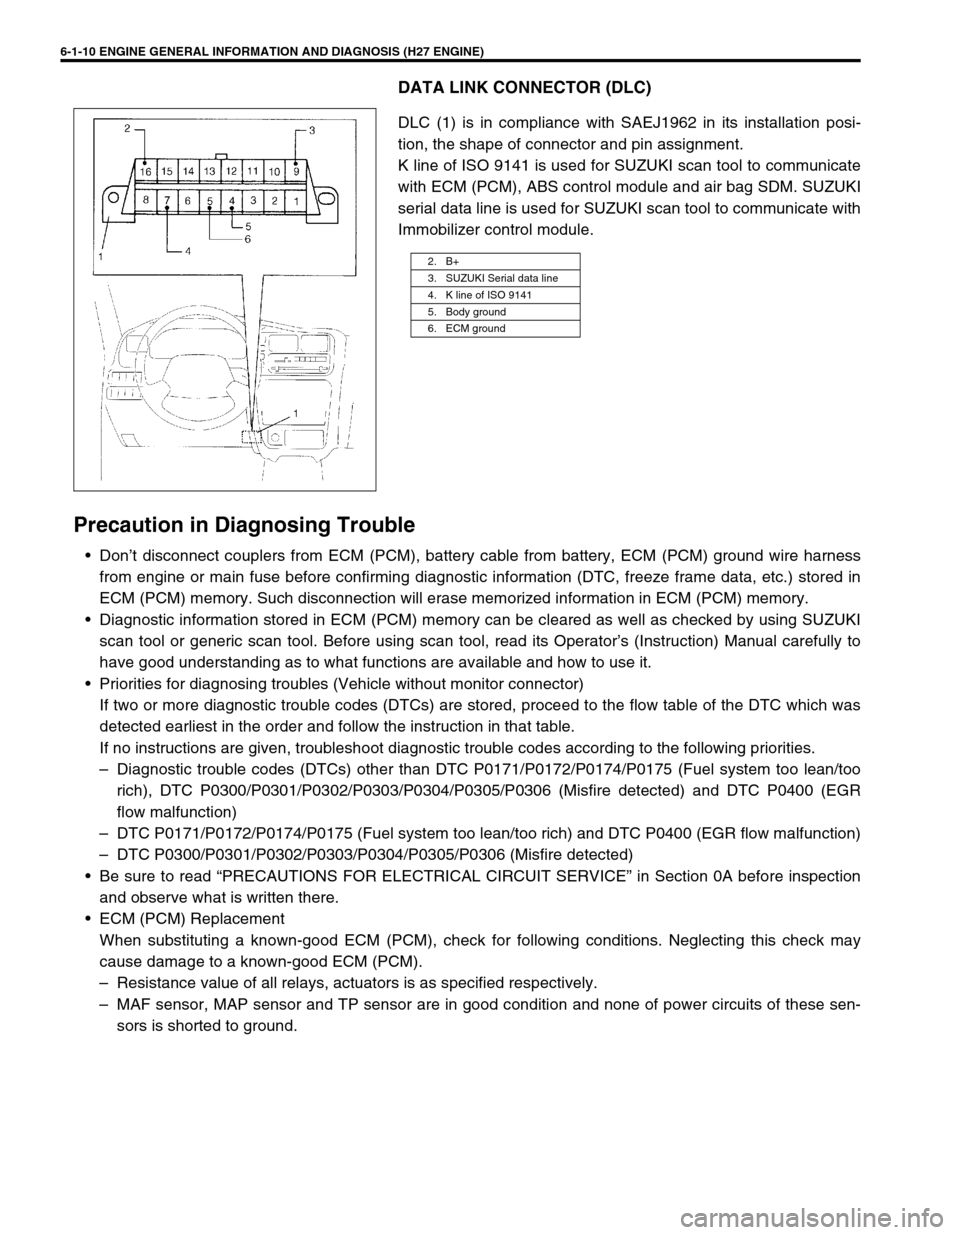 SUZUKI GRAND VITARA 2001 2.G User Guide 6-1-10 ENGINE GENERAL INFORMATION AND DIAGNOSIS (H27 ENGINE)
DATA LINK CONNECTOR (DLC)
DLC (1) is in compliance with SAEJ1962 in its installation posi-
tion, the shape of connector and pin assignment.